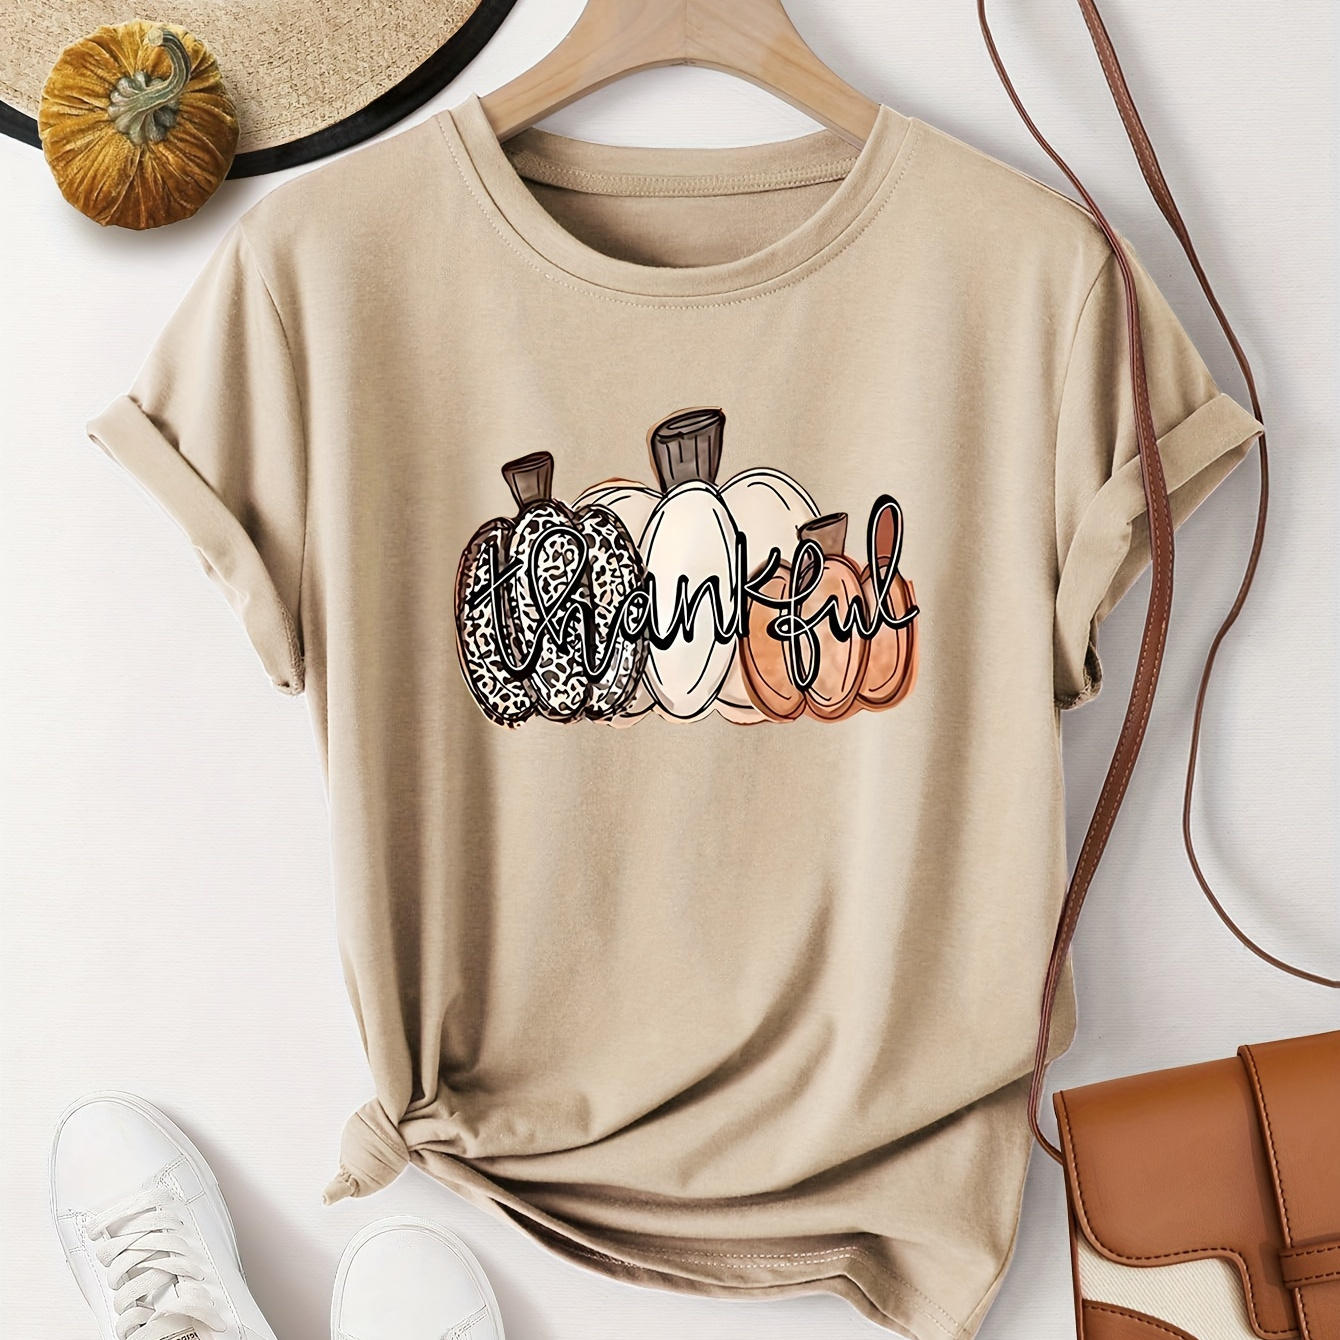 

Women's Vintage Style Casual T-shirt, With Halloween Pumpkin Lettering Print, Round Neck, Short Sleeve, Summer Sporty Top